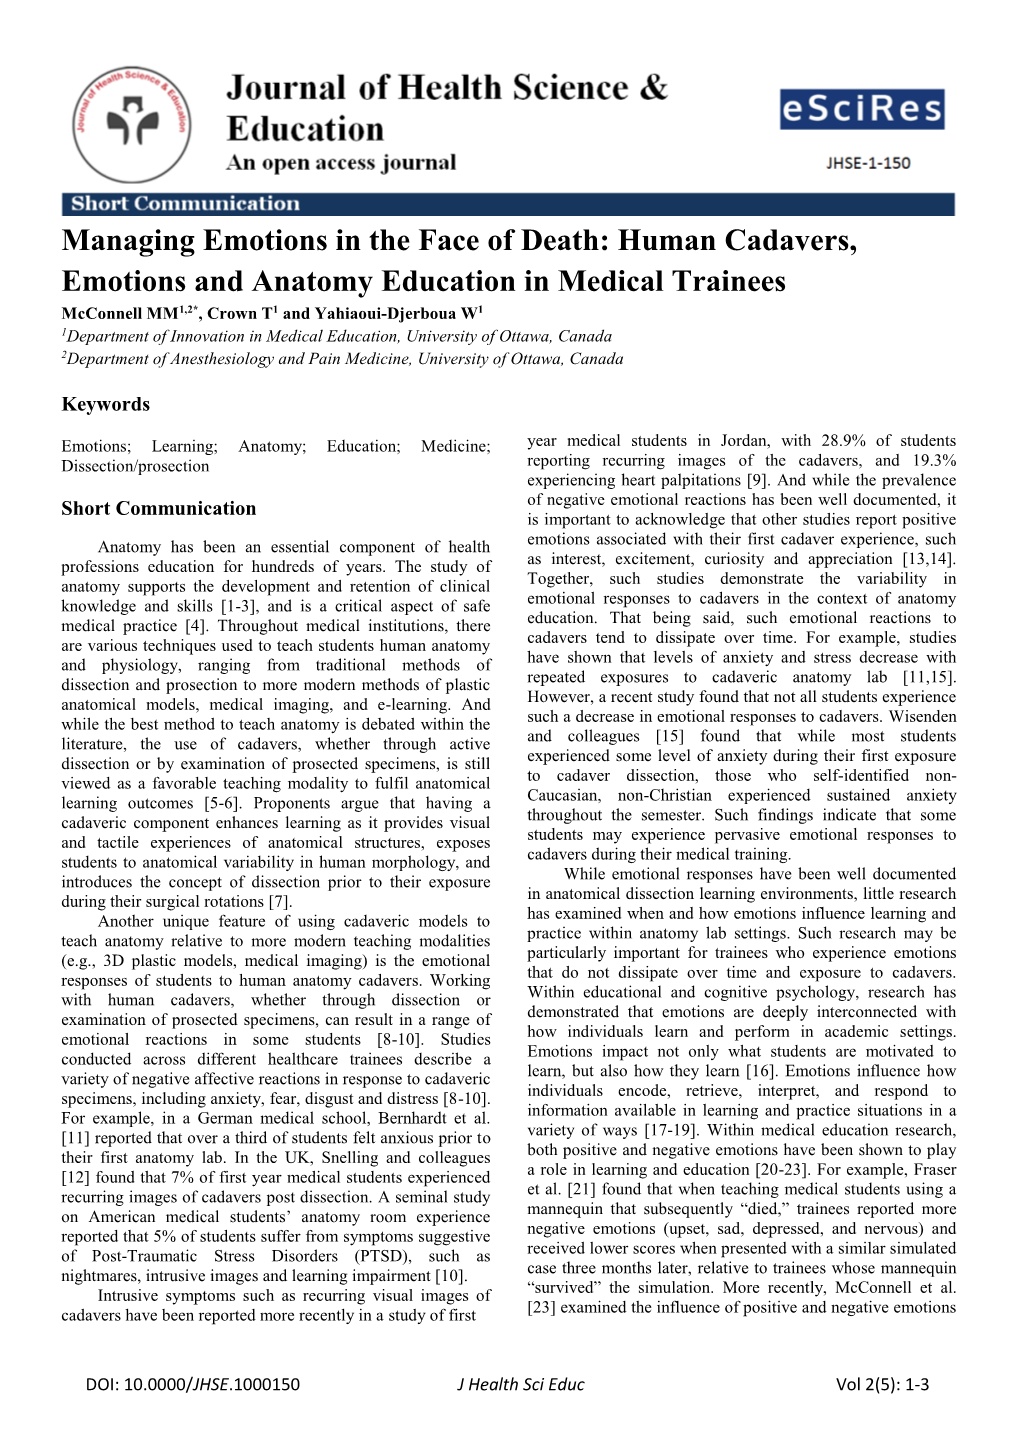 Managing Emotions in the Face of Death: Human Cadavers, Emotions and Anatomy Education in Medical Trainees